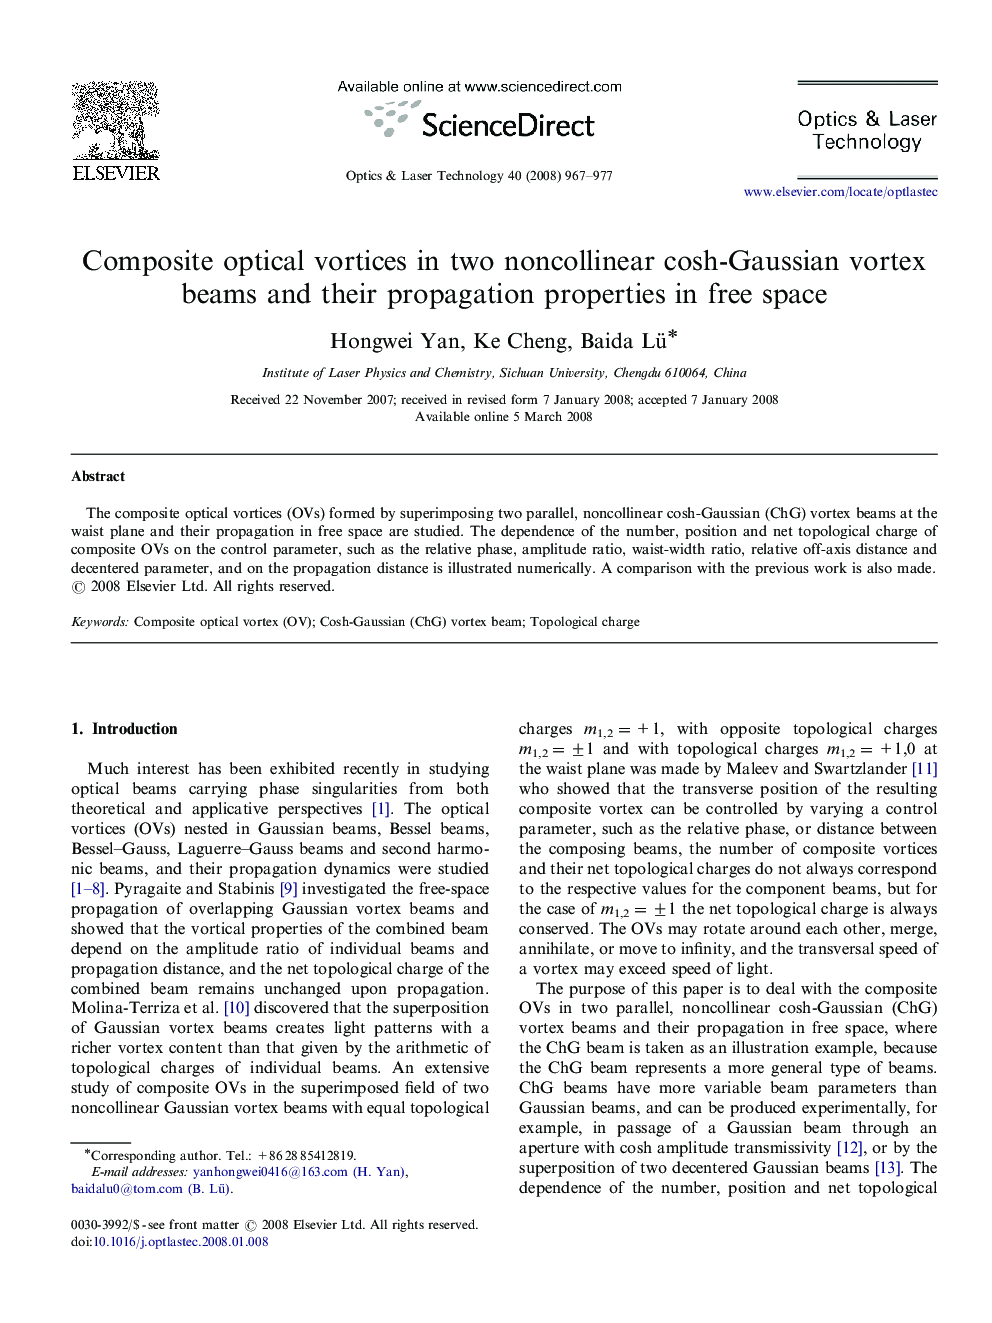 Composite optical vortices in two noncollinear cosh-Gaussian vortex beams and their propagation properties in free space